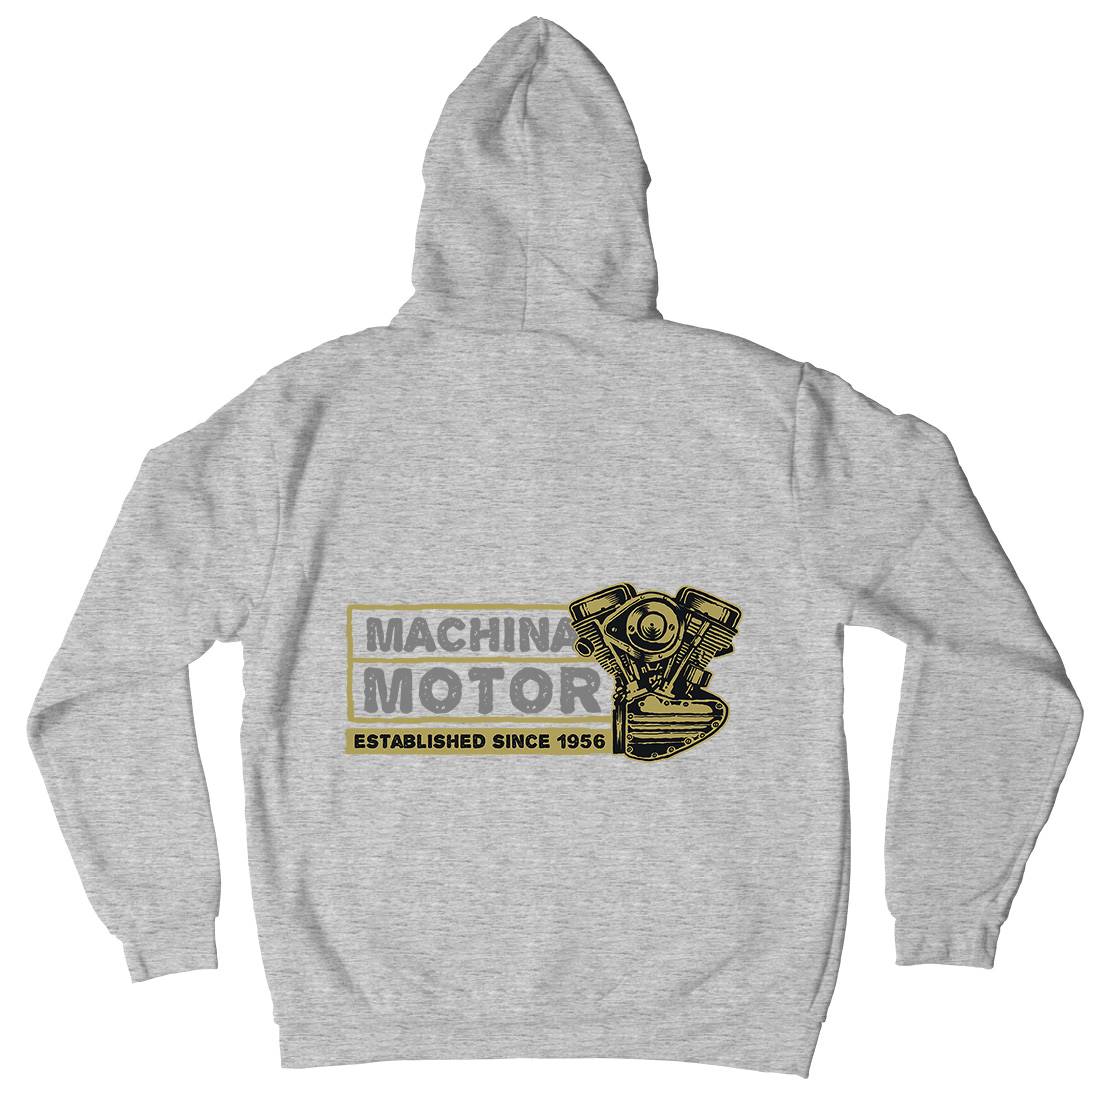 Machina Motor Mens Hoodie With Pocket Motorcycles A340